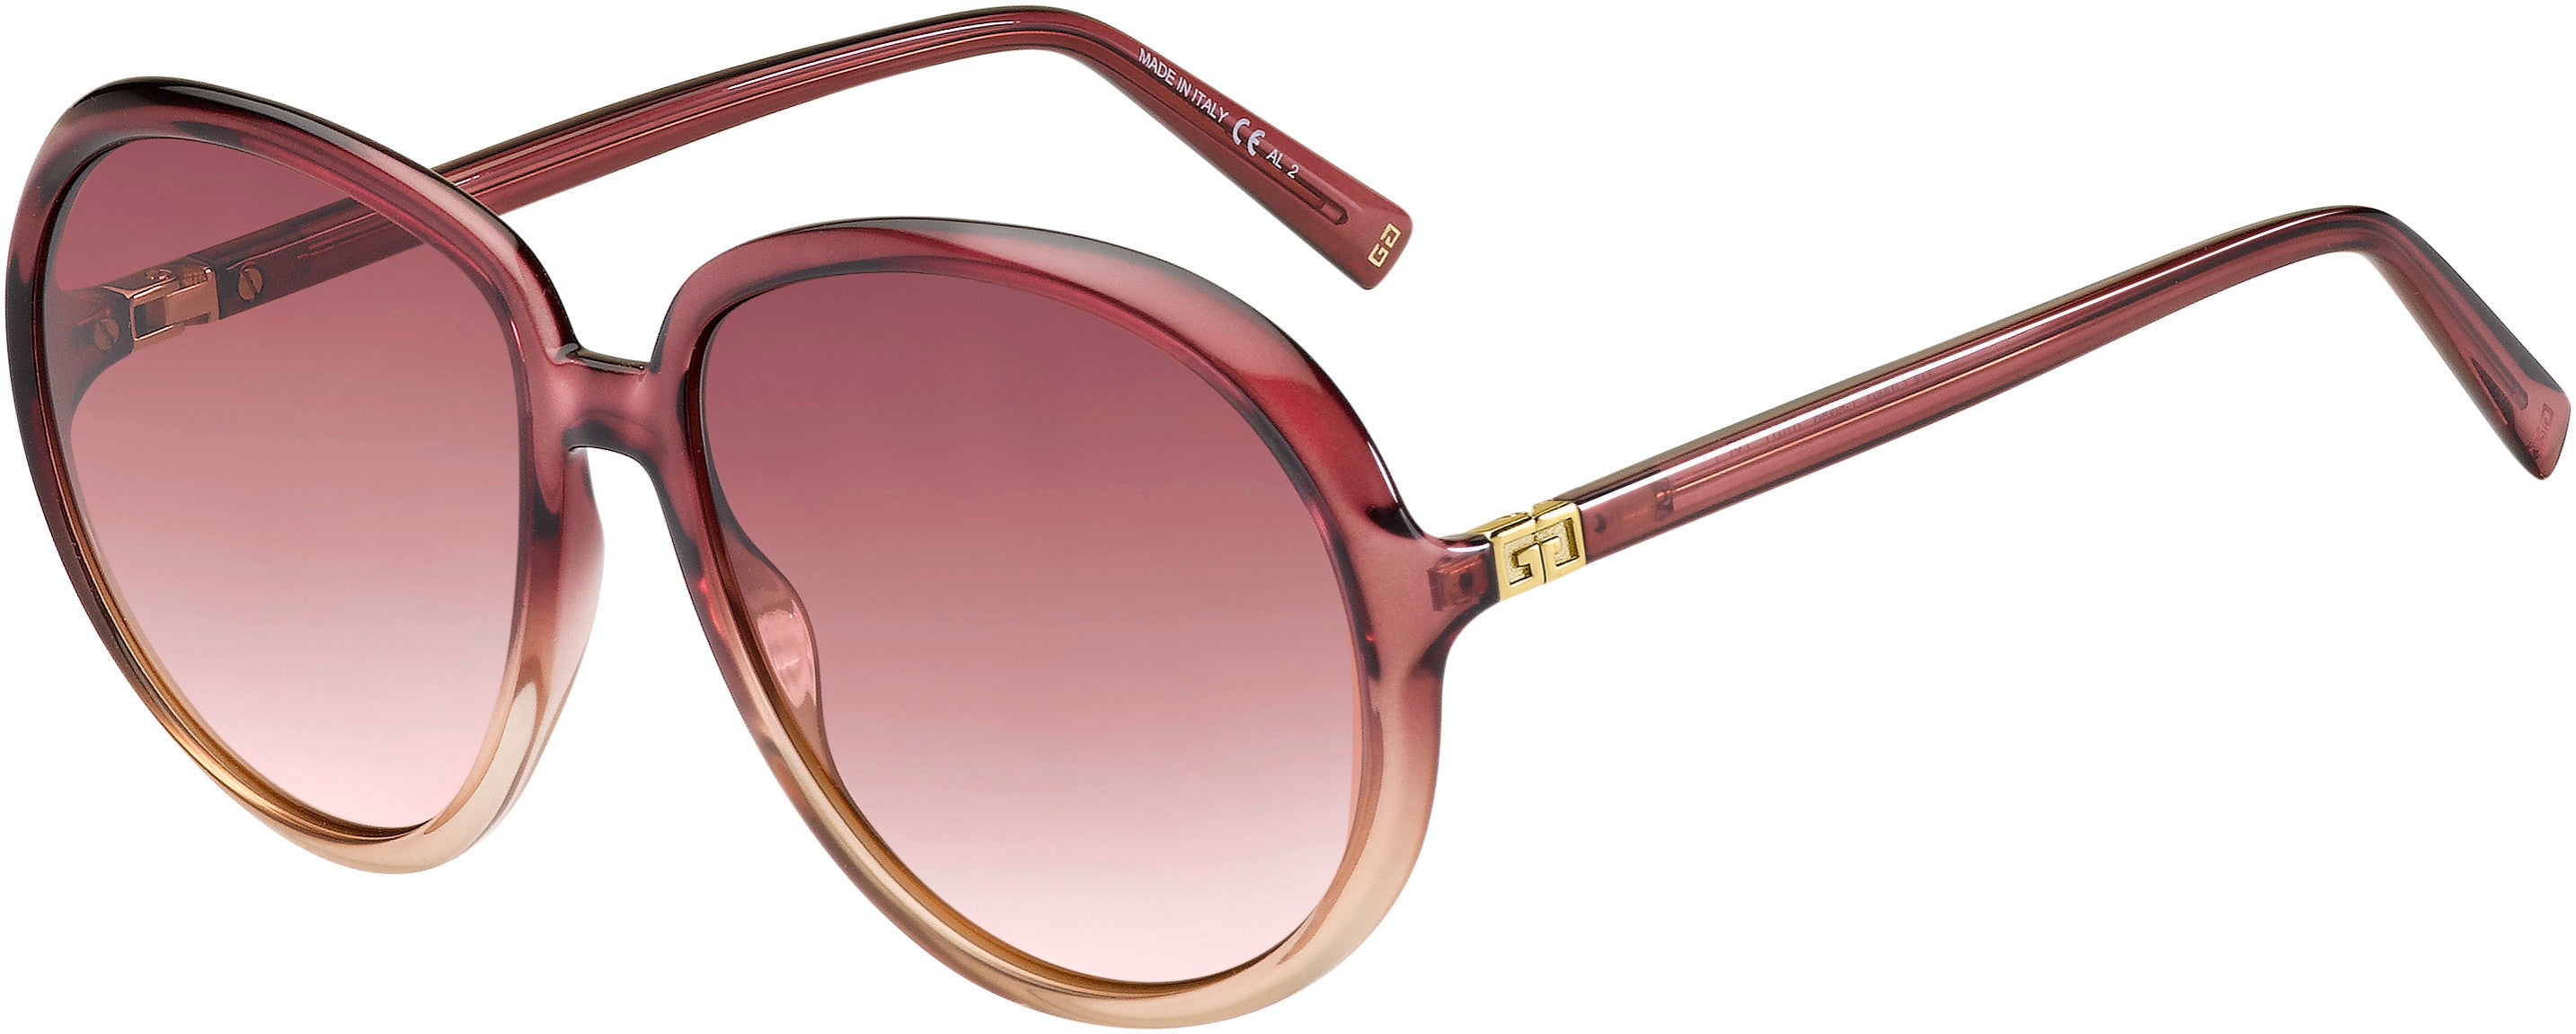  Givenchy 7180/S Oval Modified Sunglasses 0C9N-0C9N  Pink Nude (9R Pink Gradient)